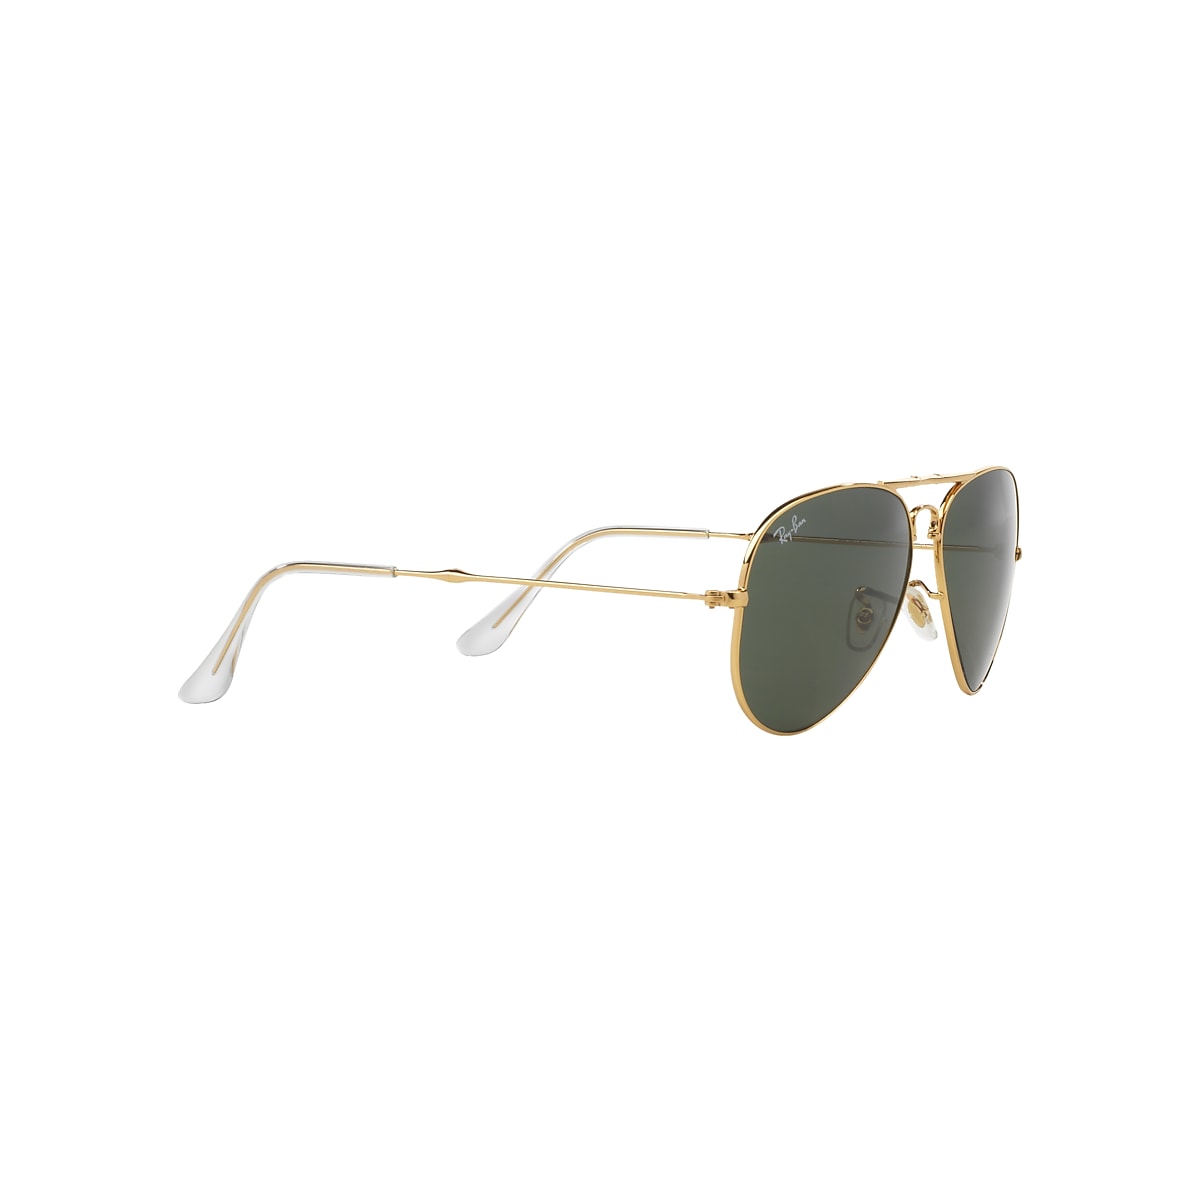 barm Vanding Revival AVIATOR FOLDING Sunglasses in Gold and Green - RB3479 | Ray-Ban® DK